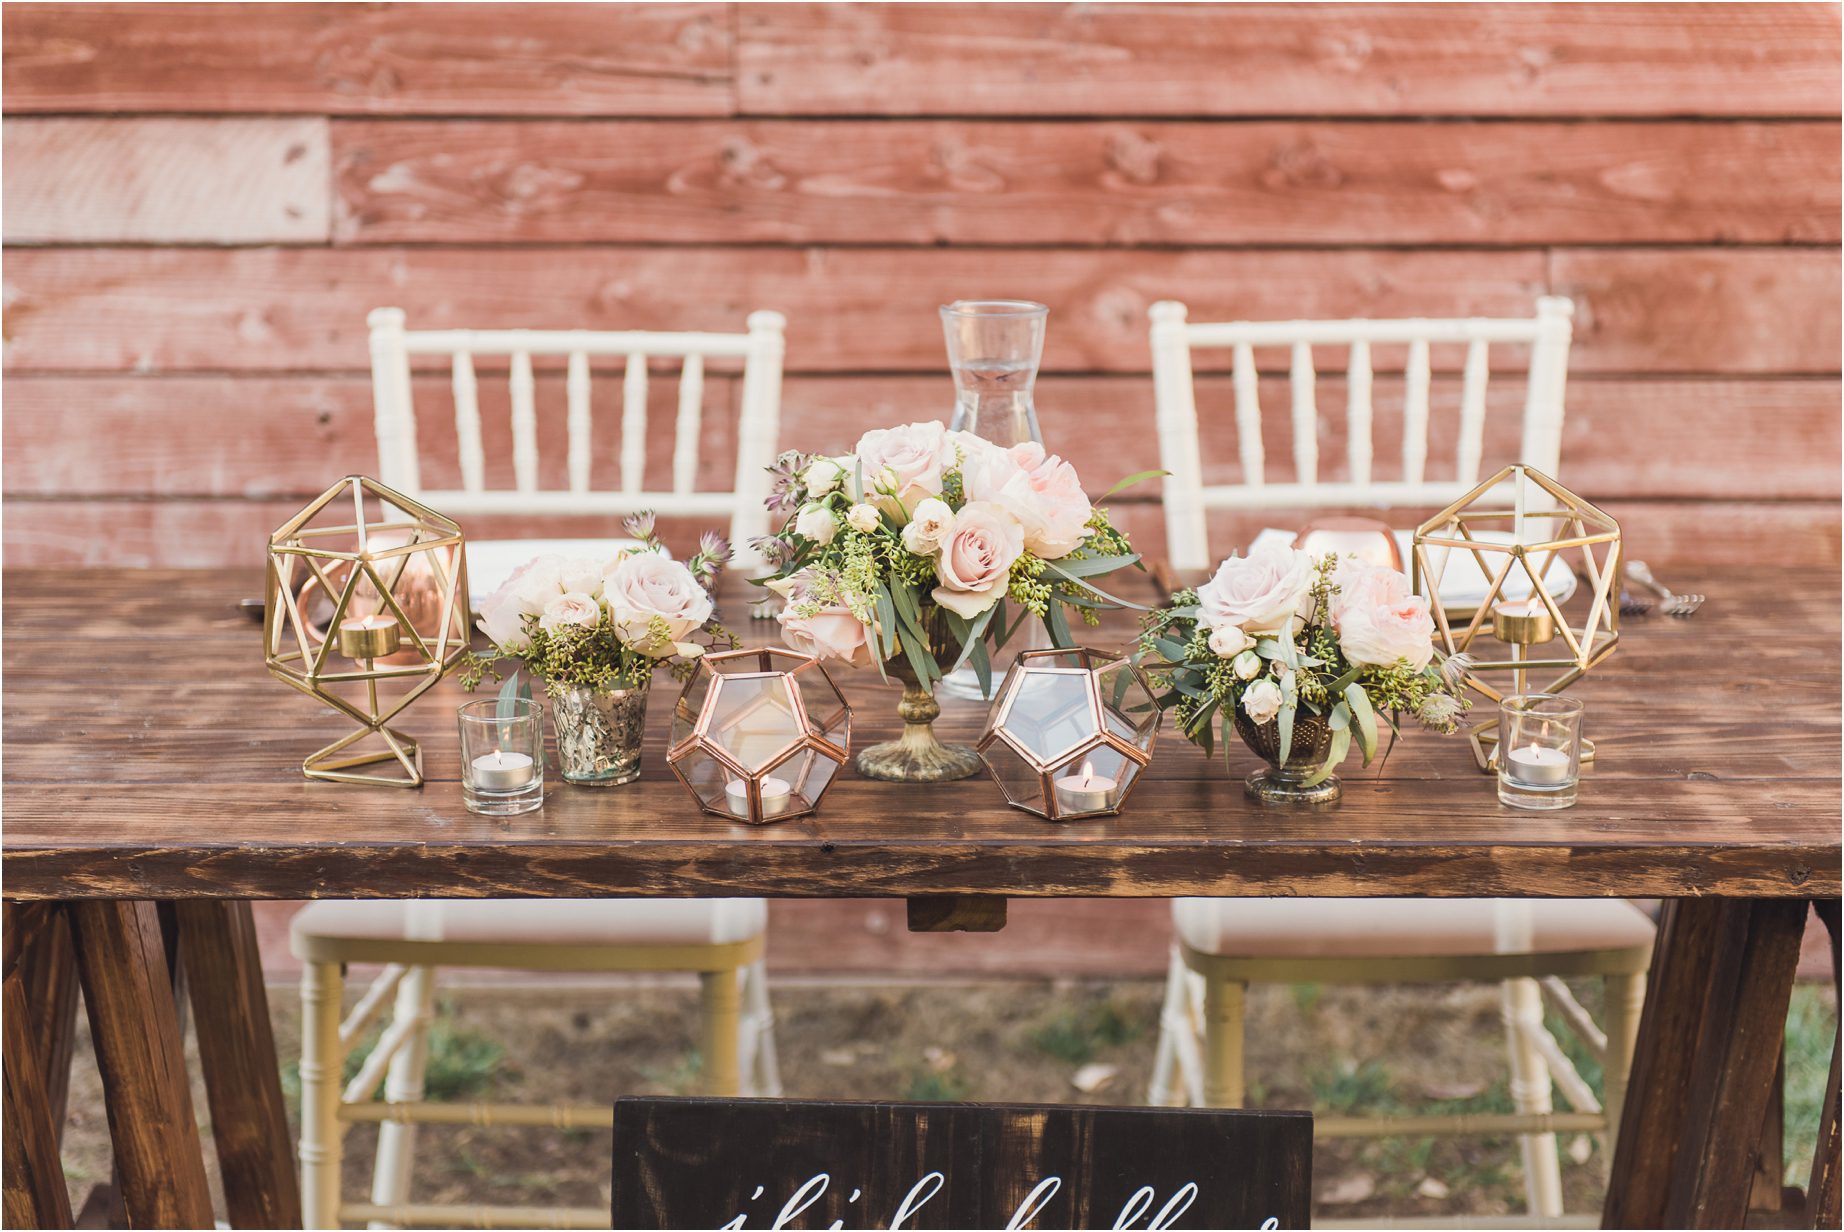 geometric shapes intermingled with flowers and chairs at a sweetheart table during a topanga canyon wedding